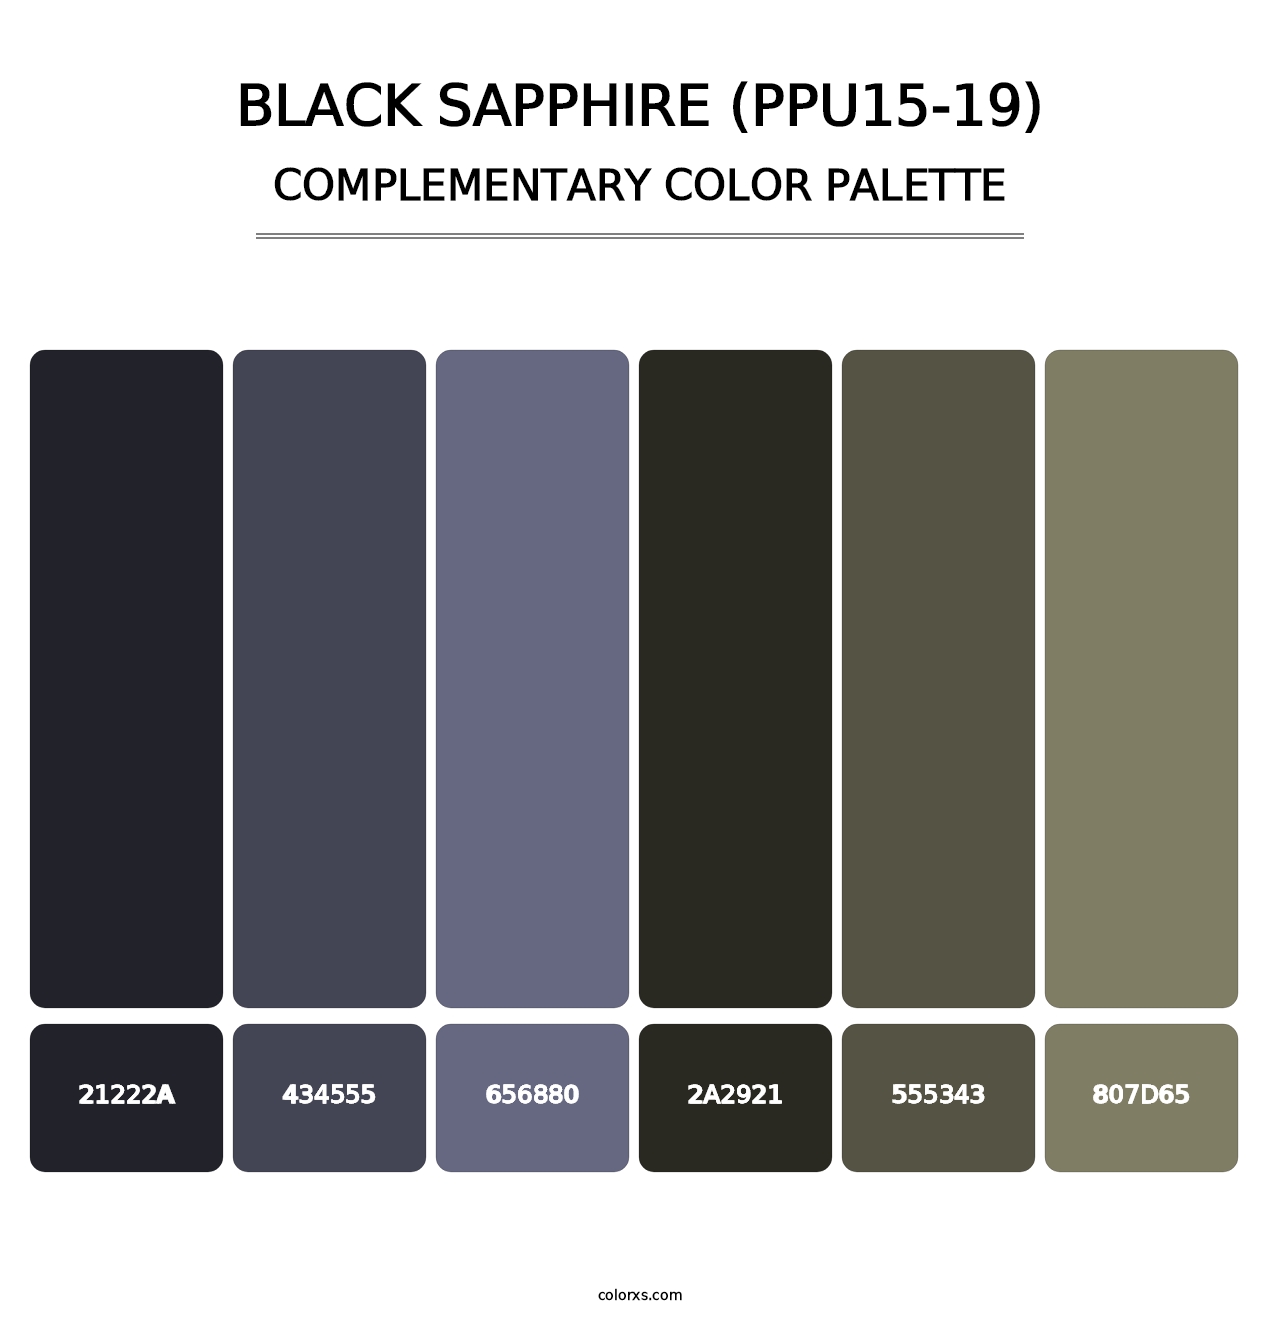 Black Sapphire (PPU15-19) - Complementary Color Palette